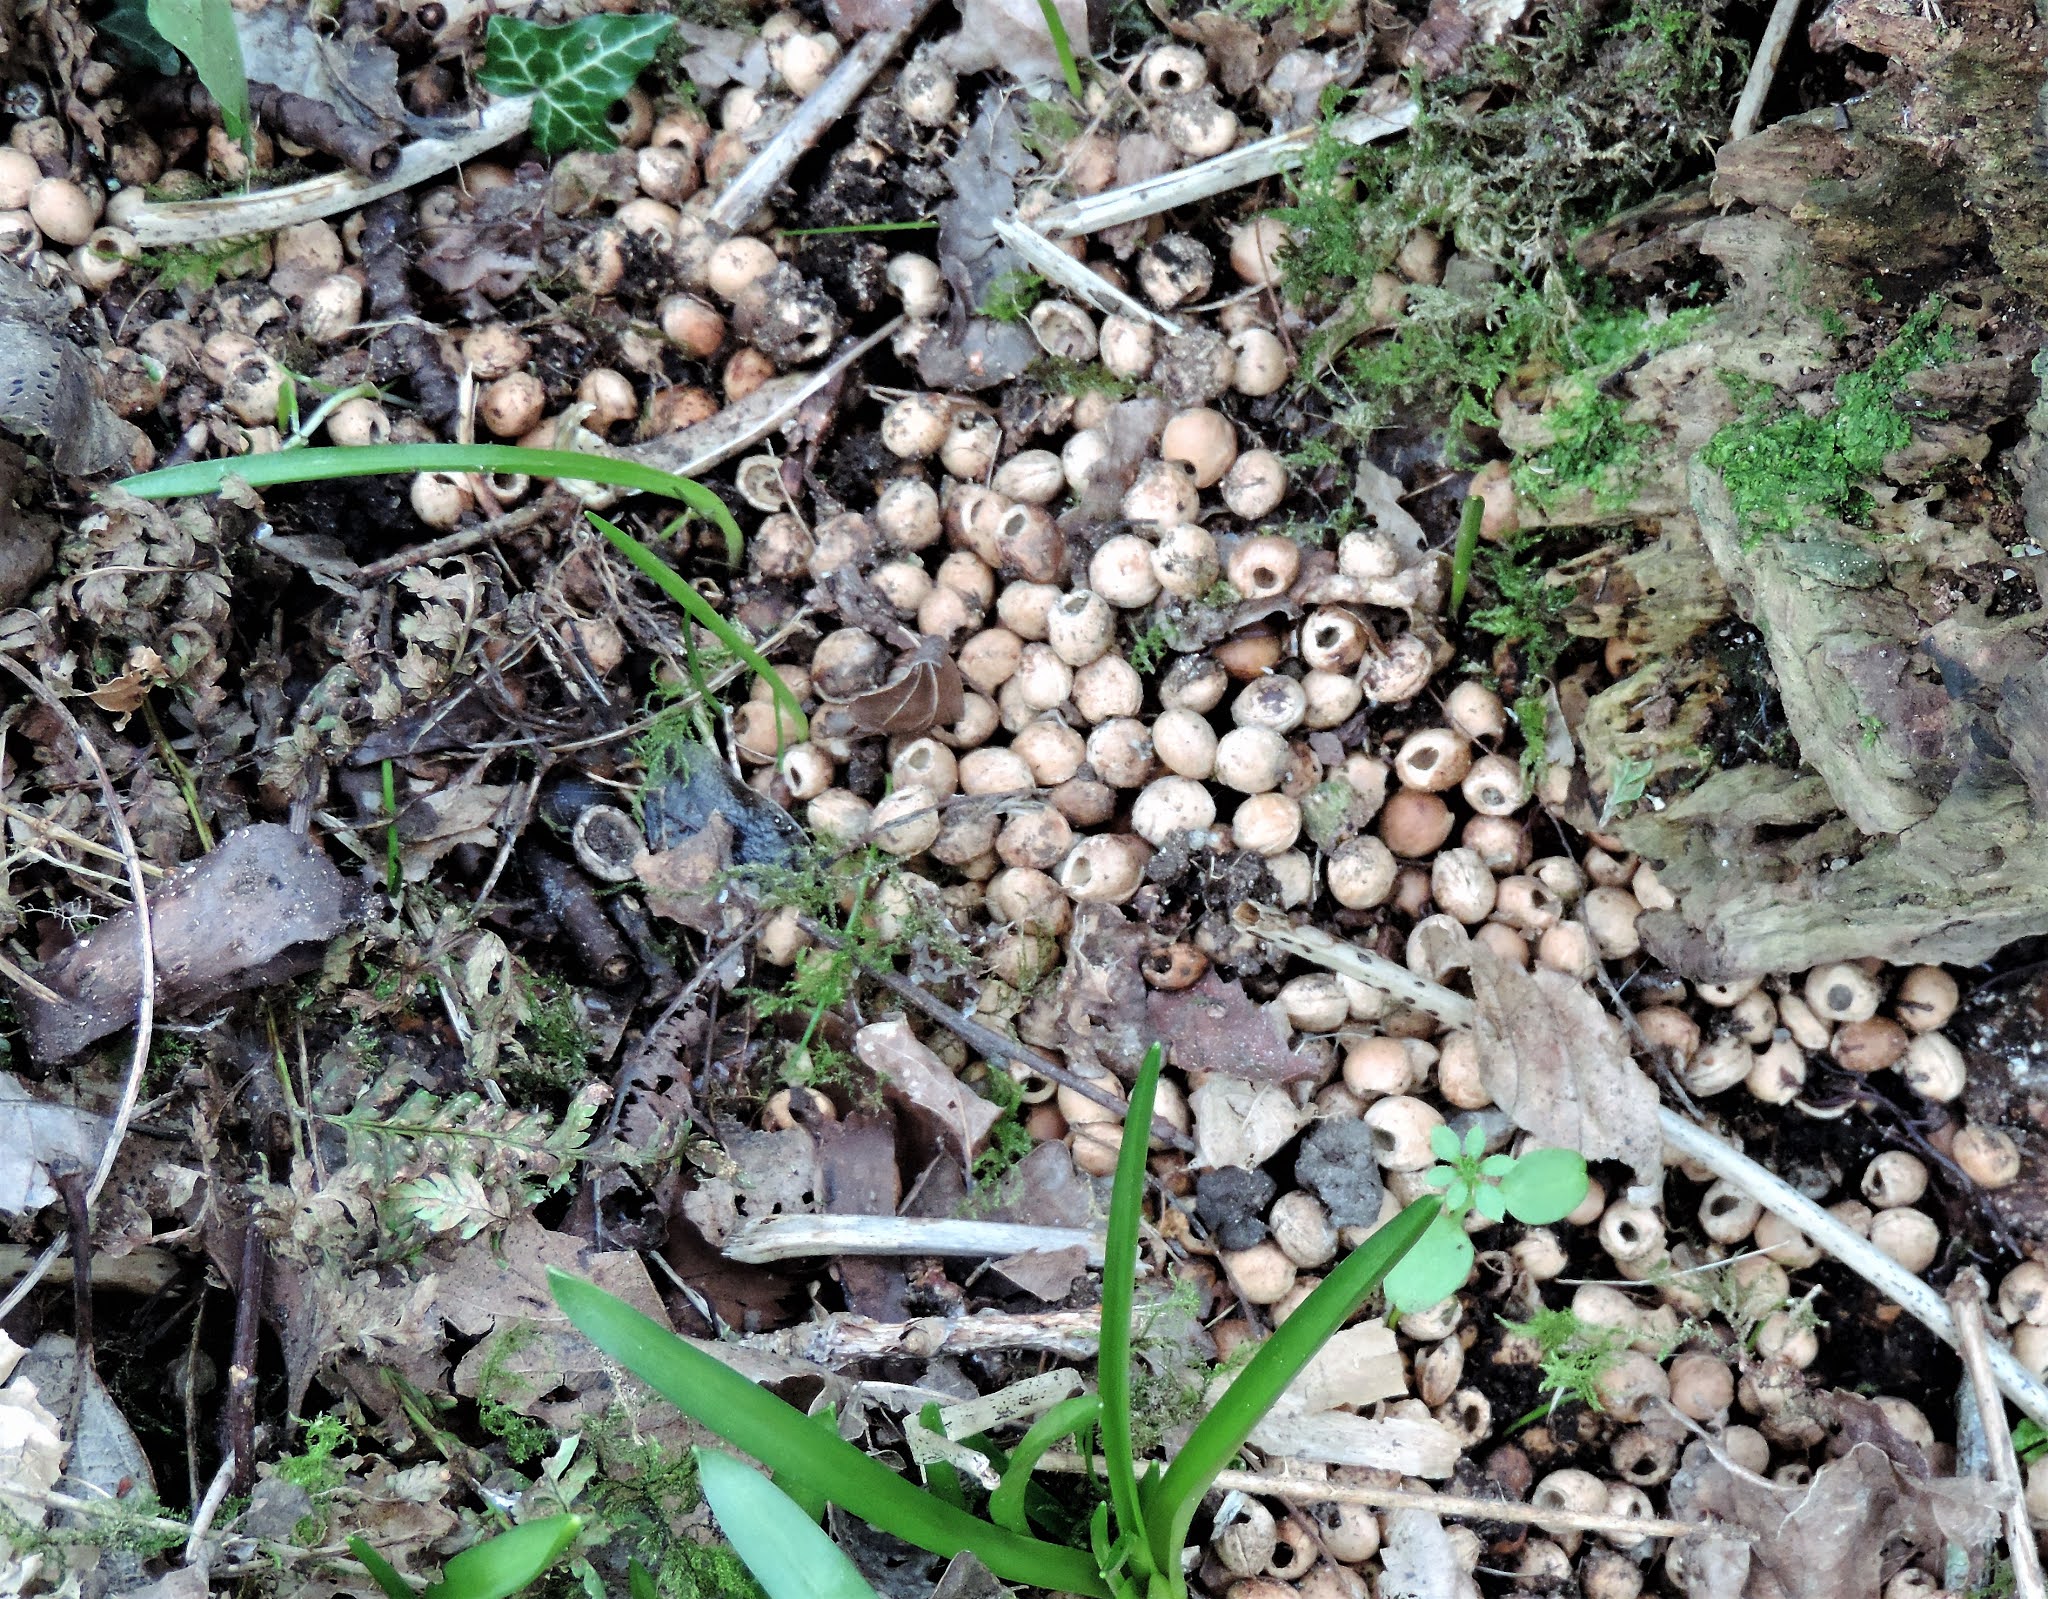 Ramblings of a Naturalist: The mouse and the cherry stones